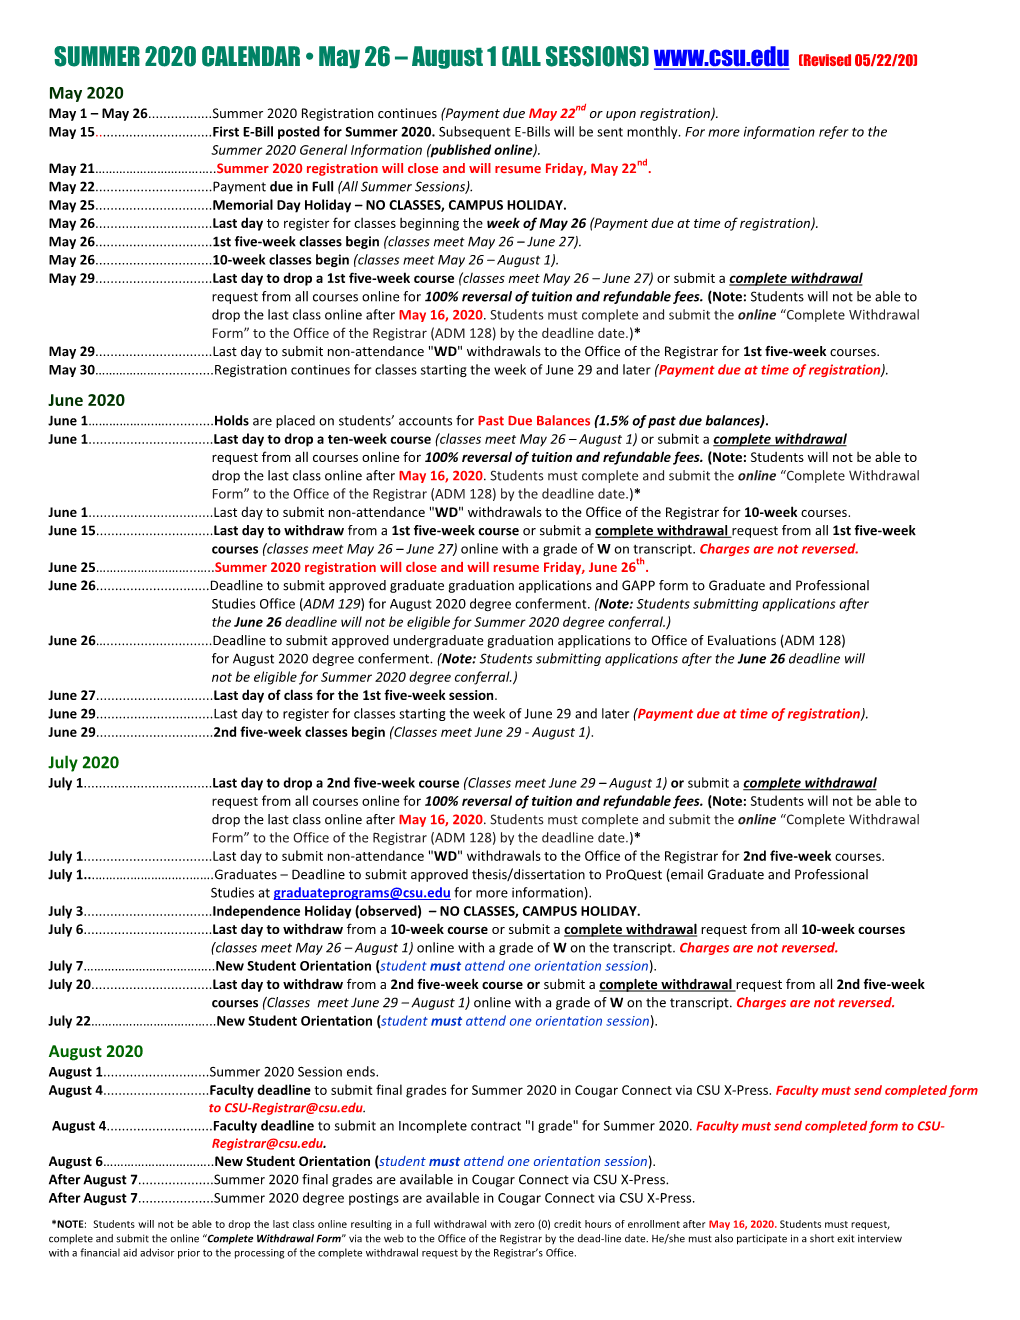 SUMMER 2020 CALENDAR • May 26 – August 1 (ALL SESSIONS) (Revised 05/22/20)